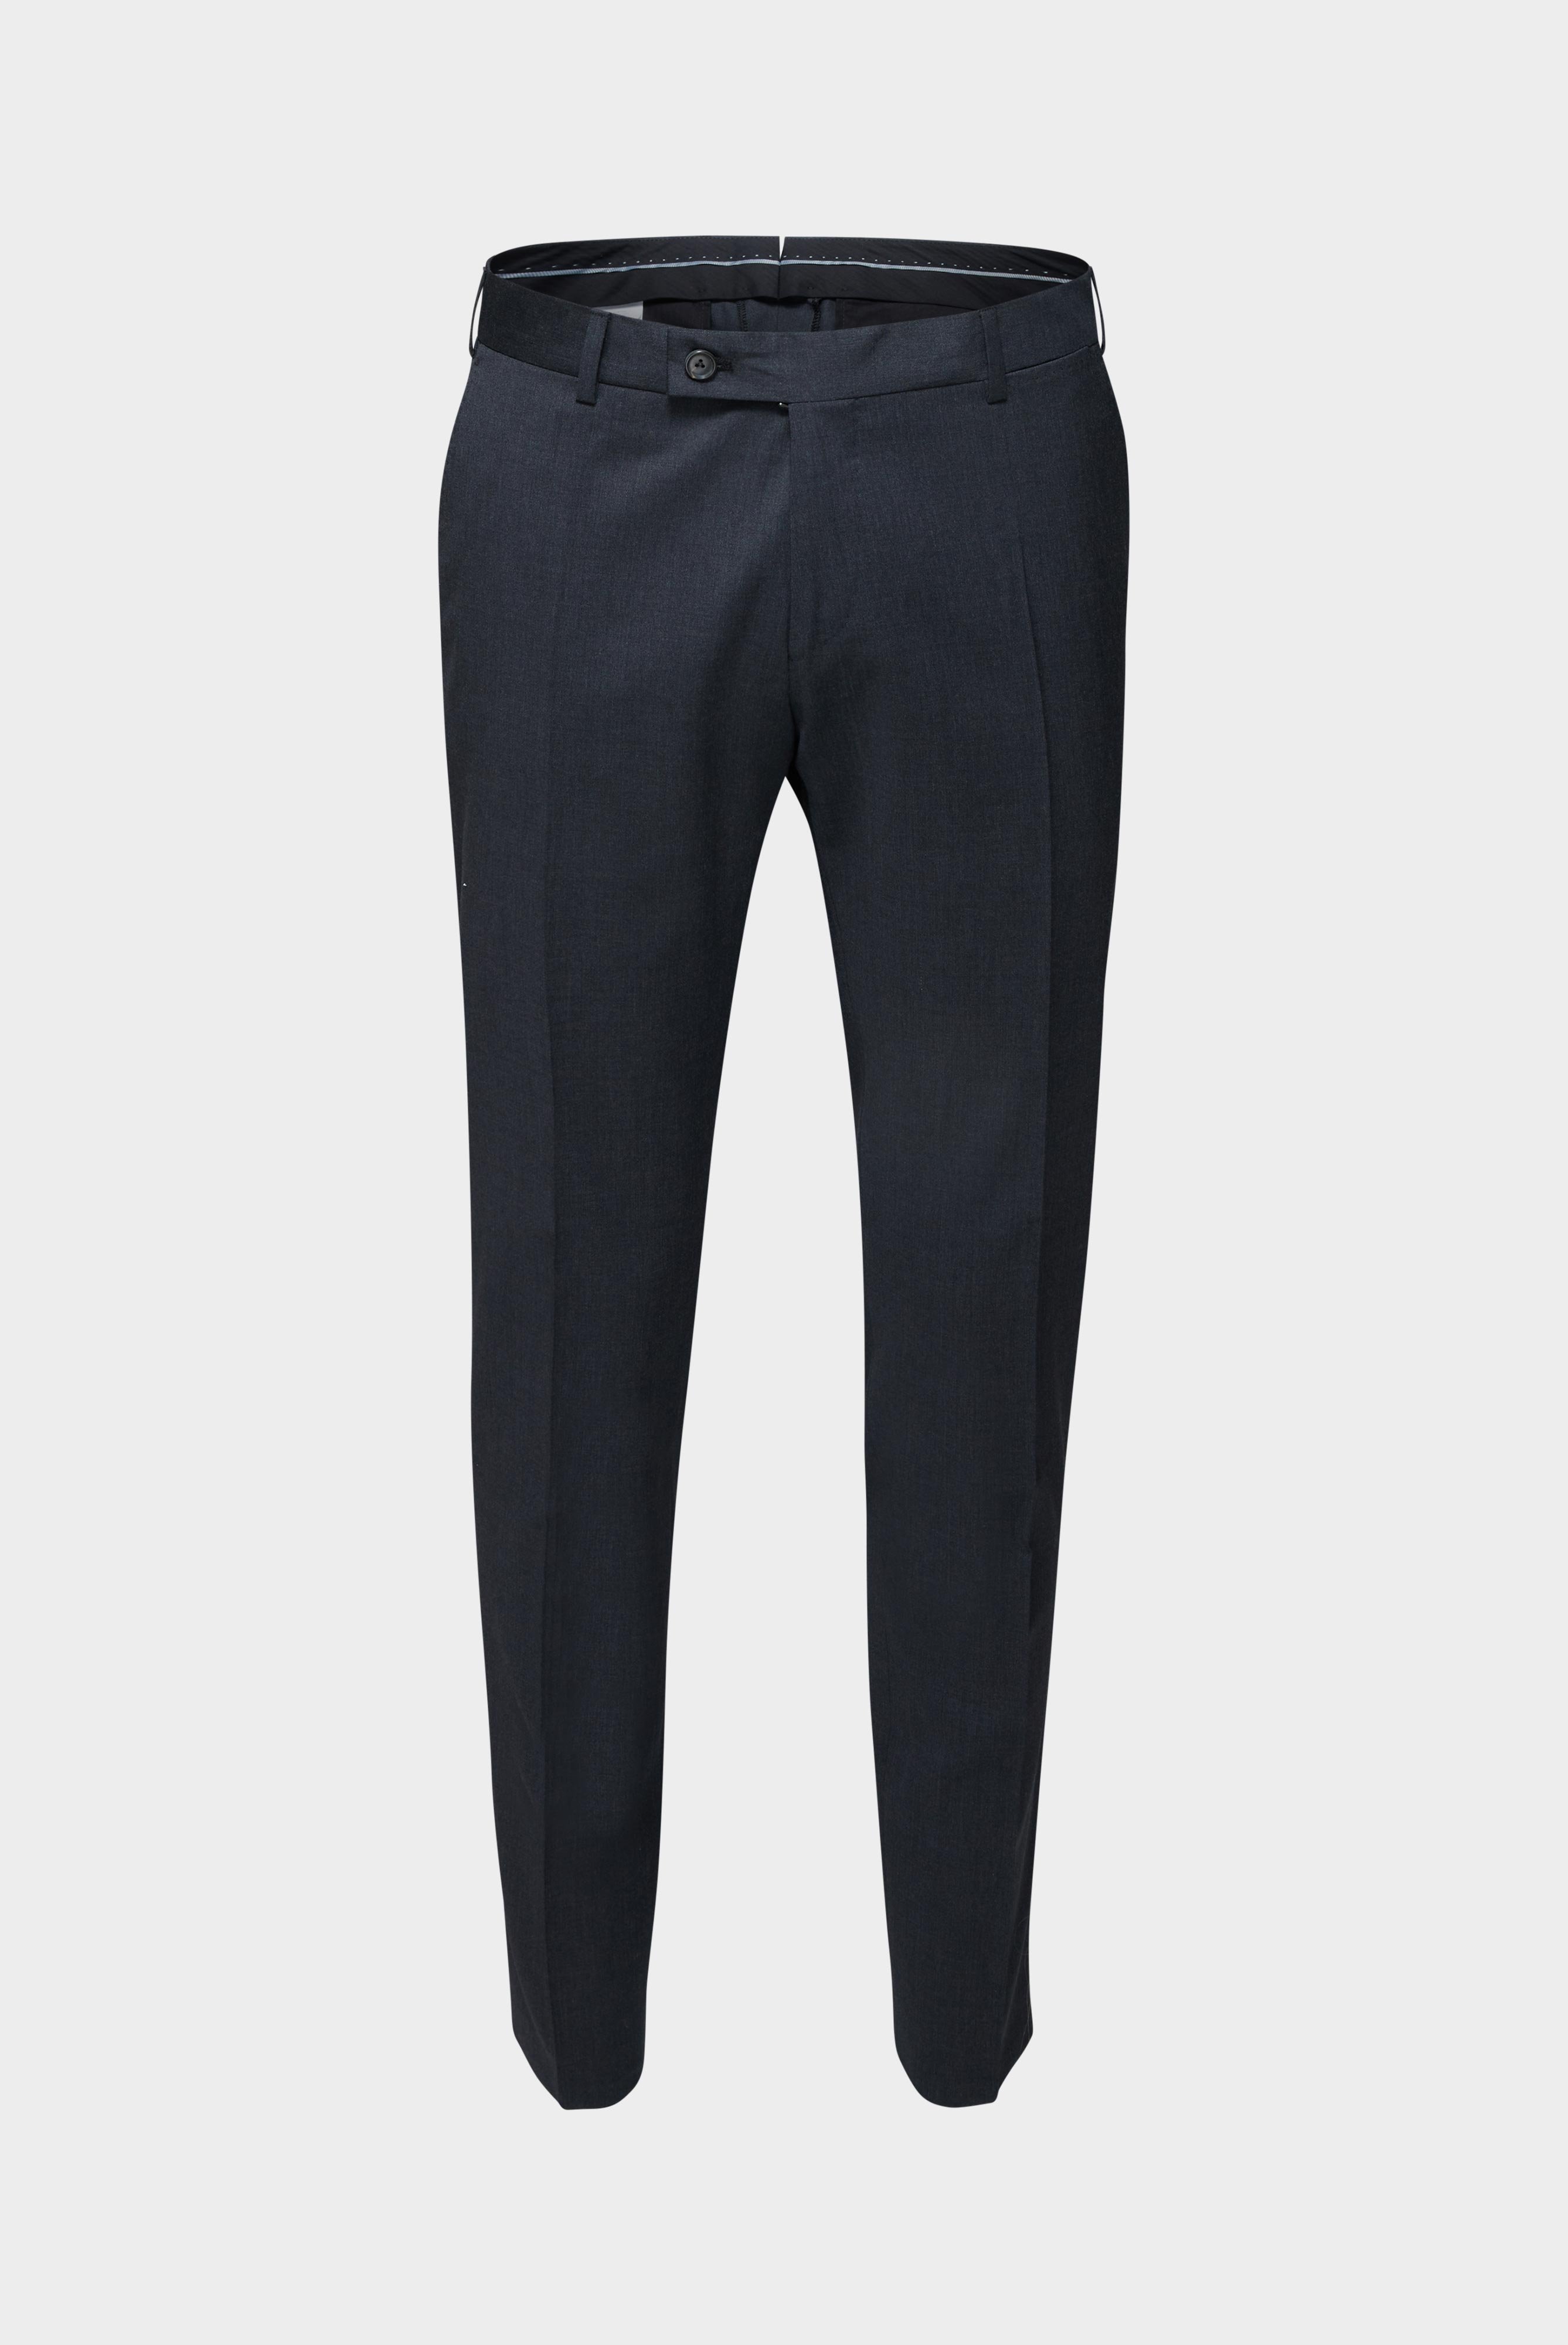 Jeans & Trousers+Wool Trousers Slim Fit+20.7880.16.H01010.090.23